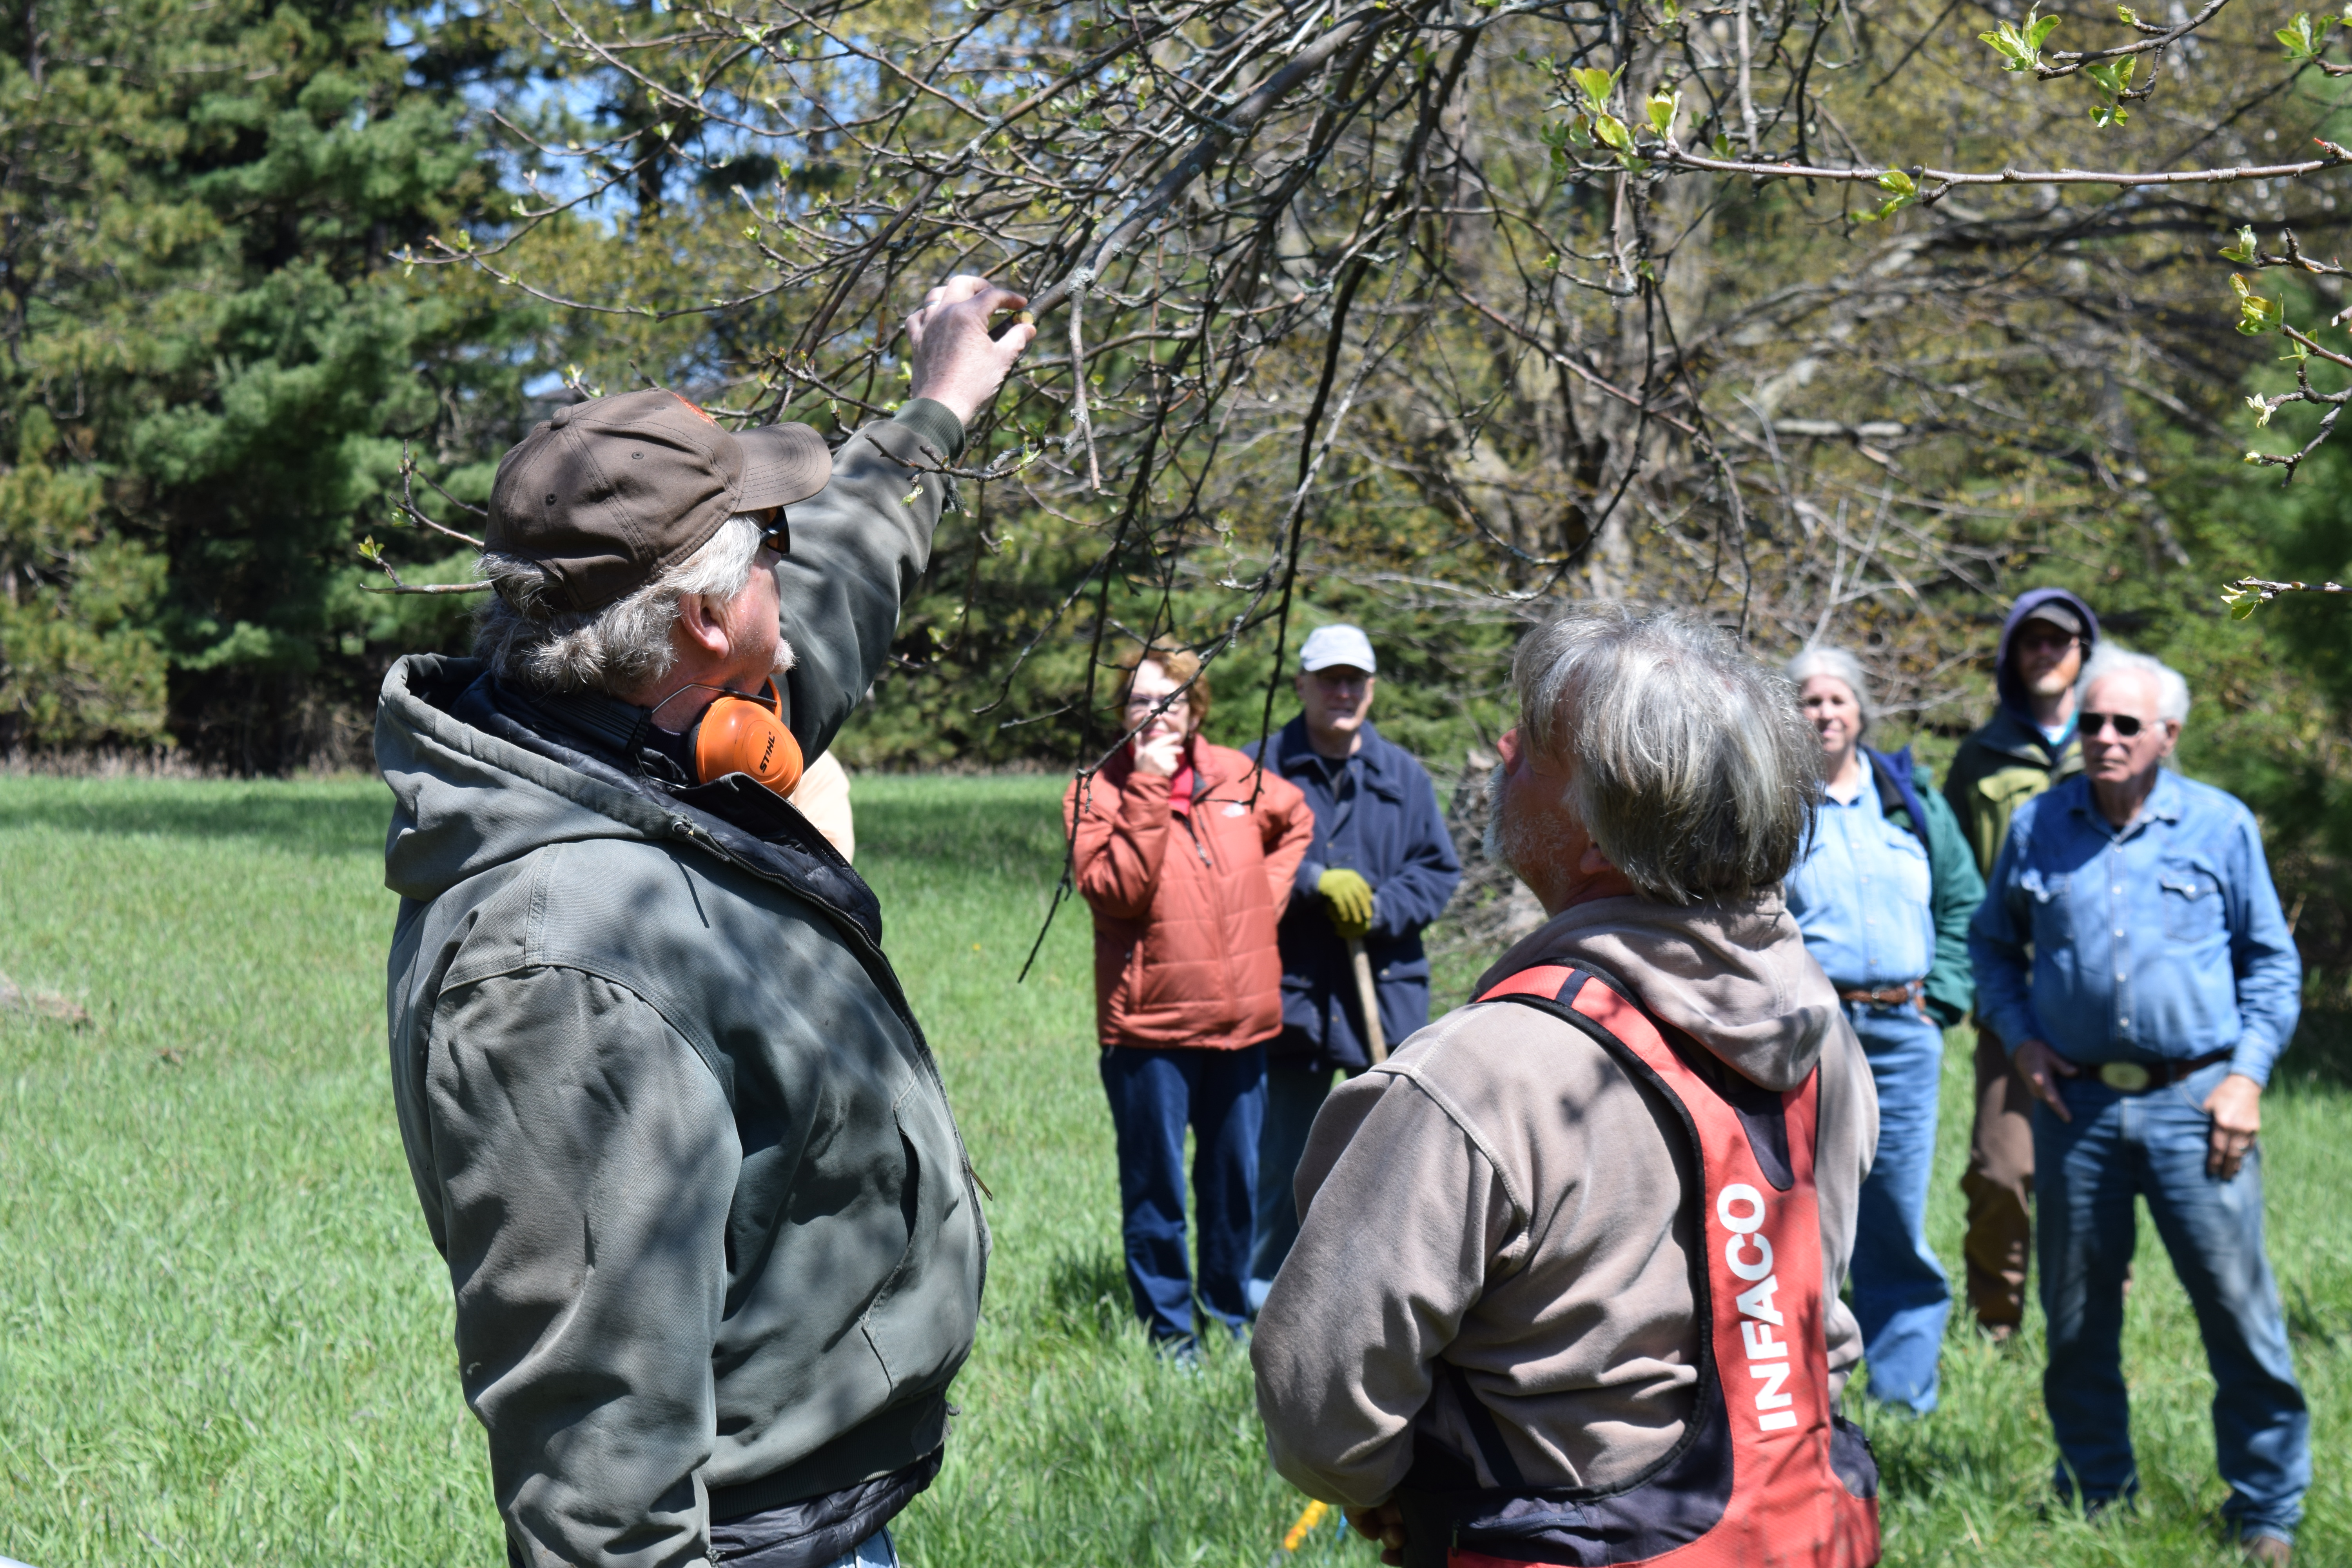 Expert pruner holds on to tree branch as he gives some pruning tips to workshop participants.